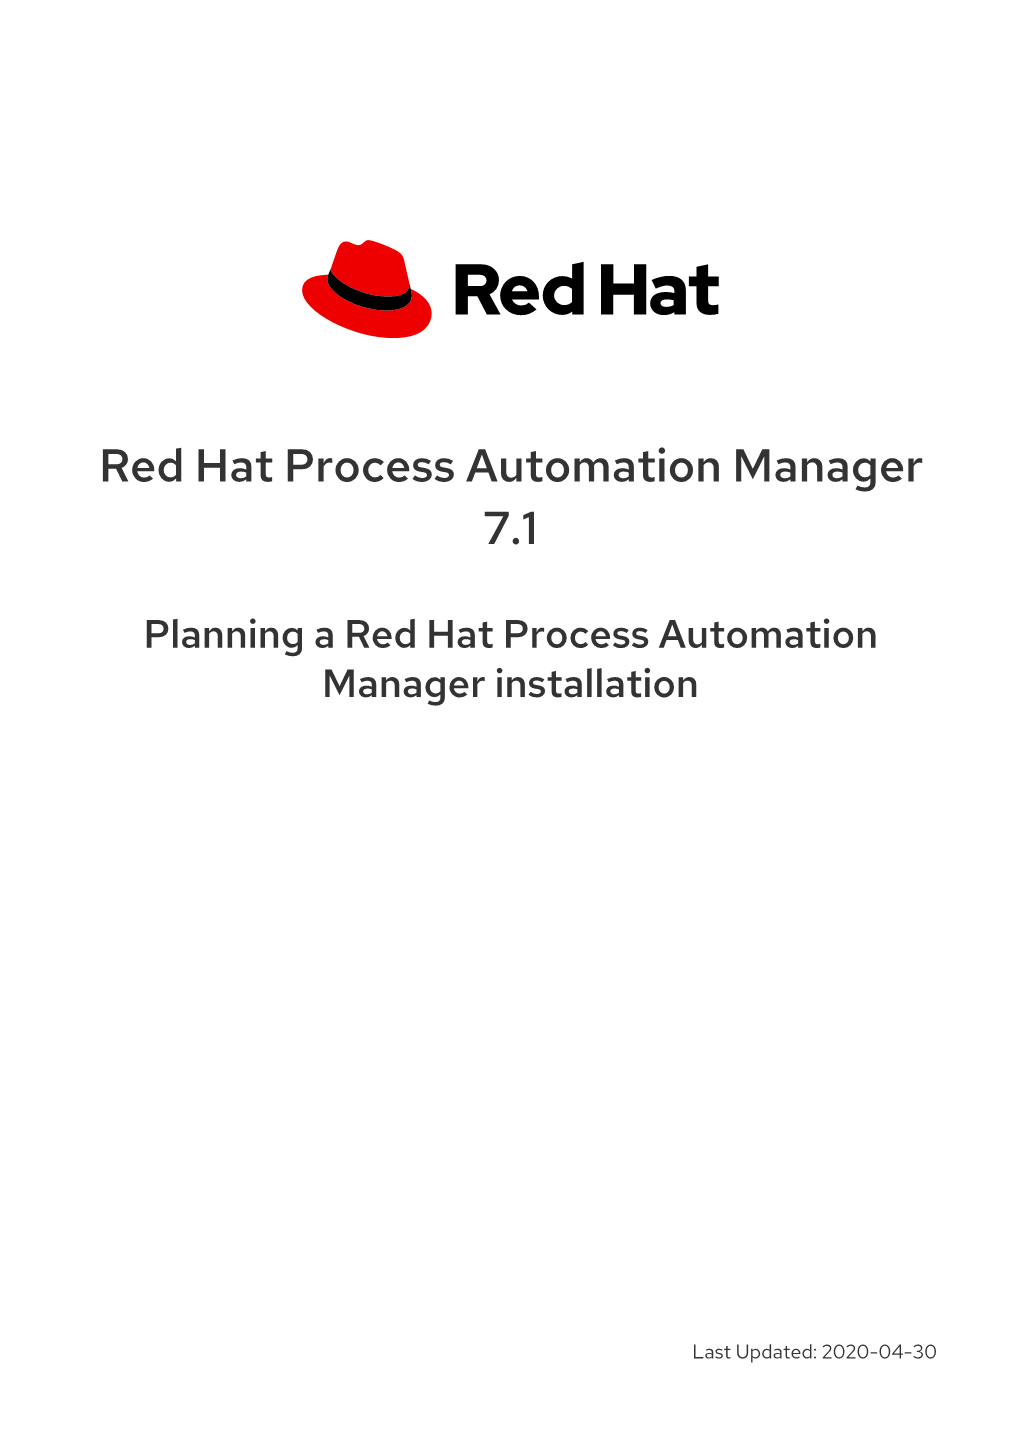 Red Hat Process Automation Manager 7.1